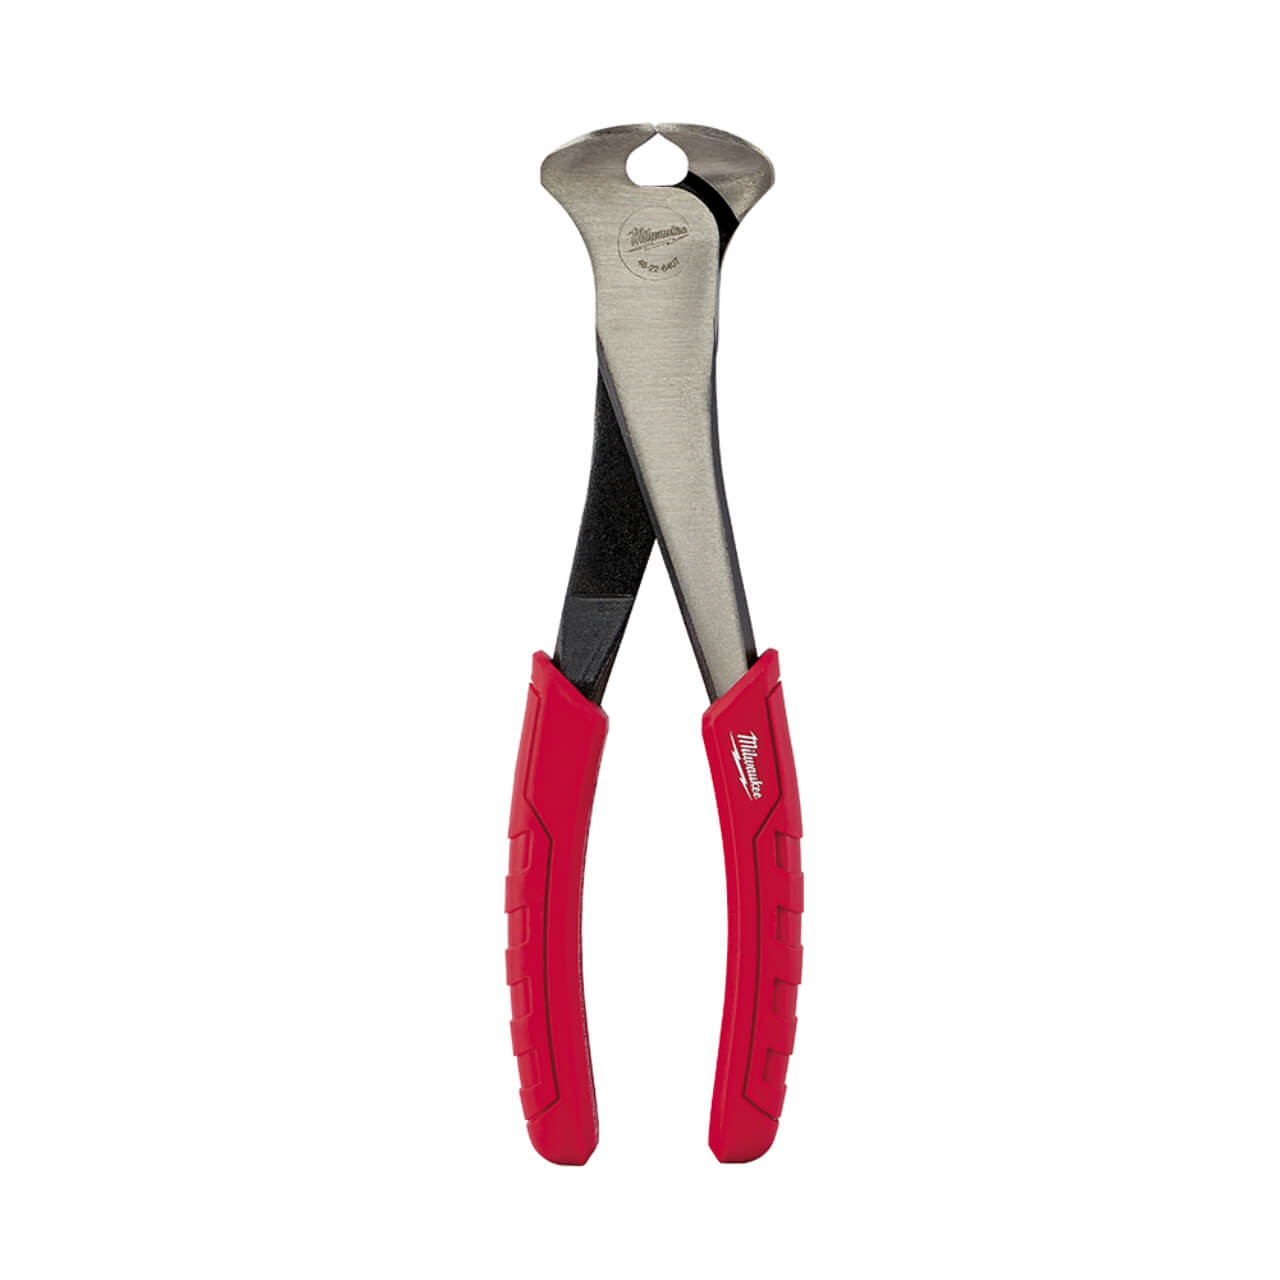 Milwaukee 178mm End Nipping Pliers